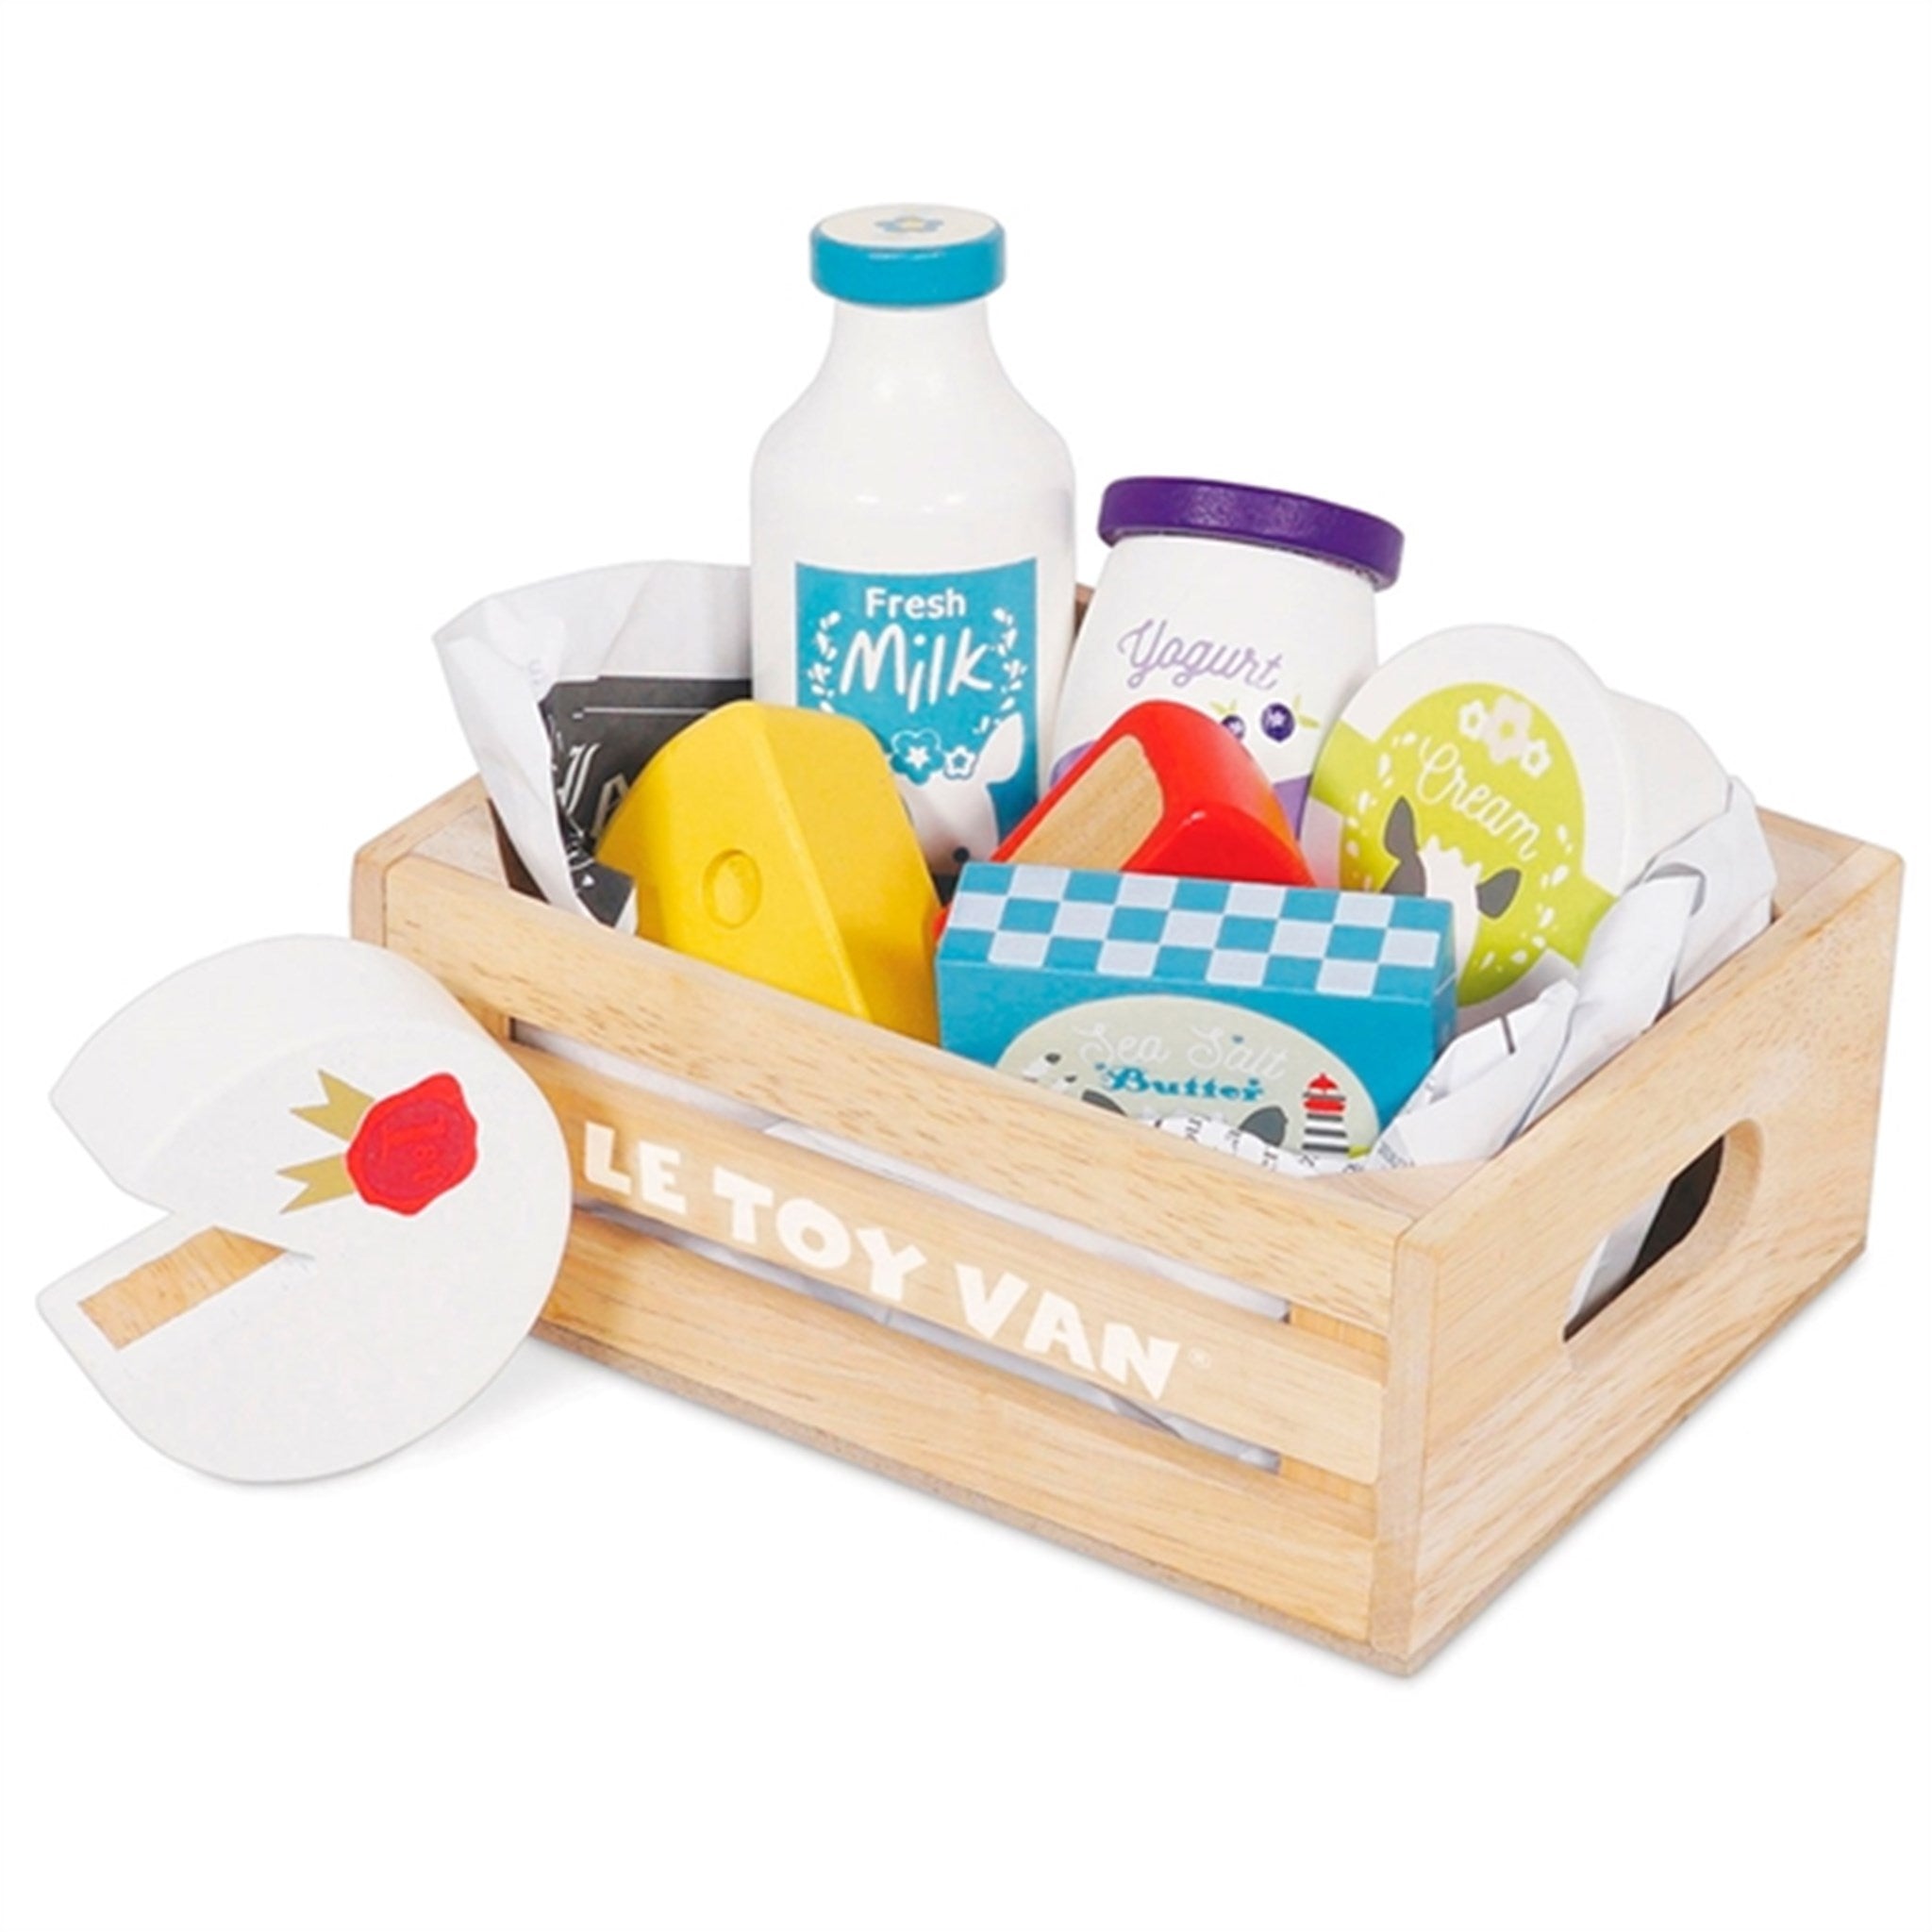 Le Toy Van Honeybake Cheese and Diary Market Crate